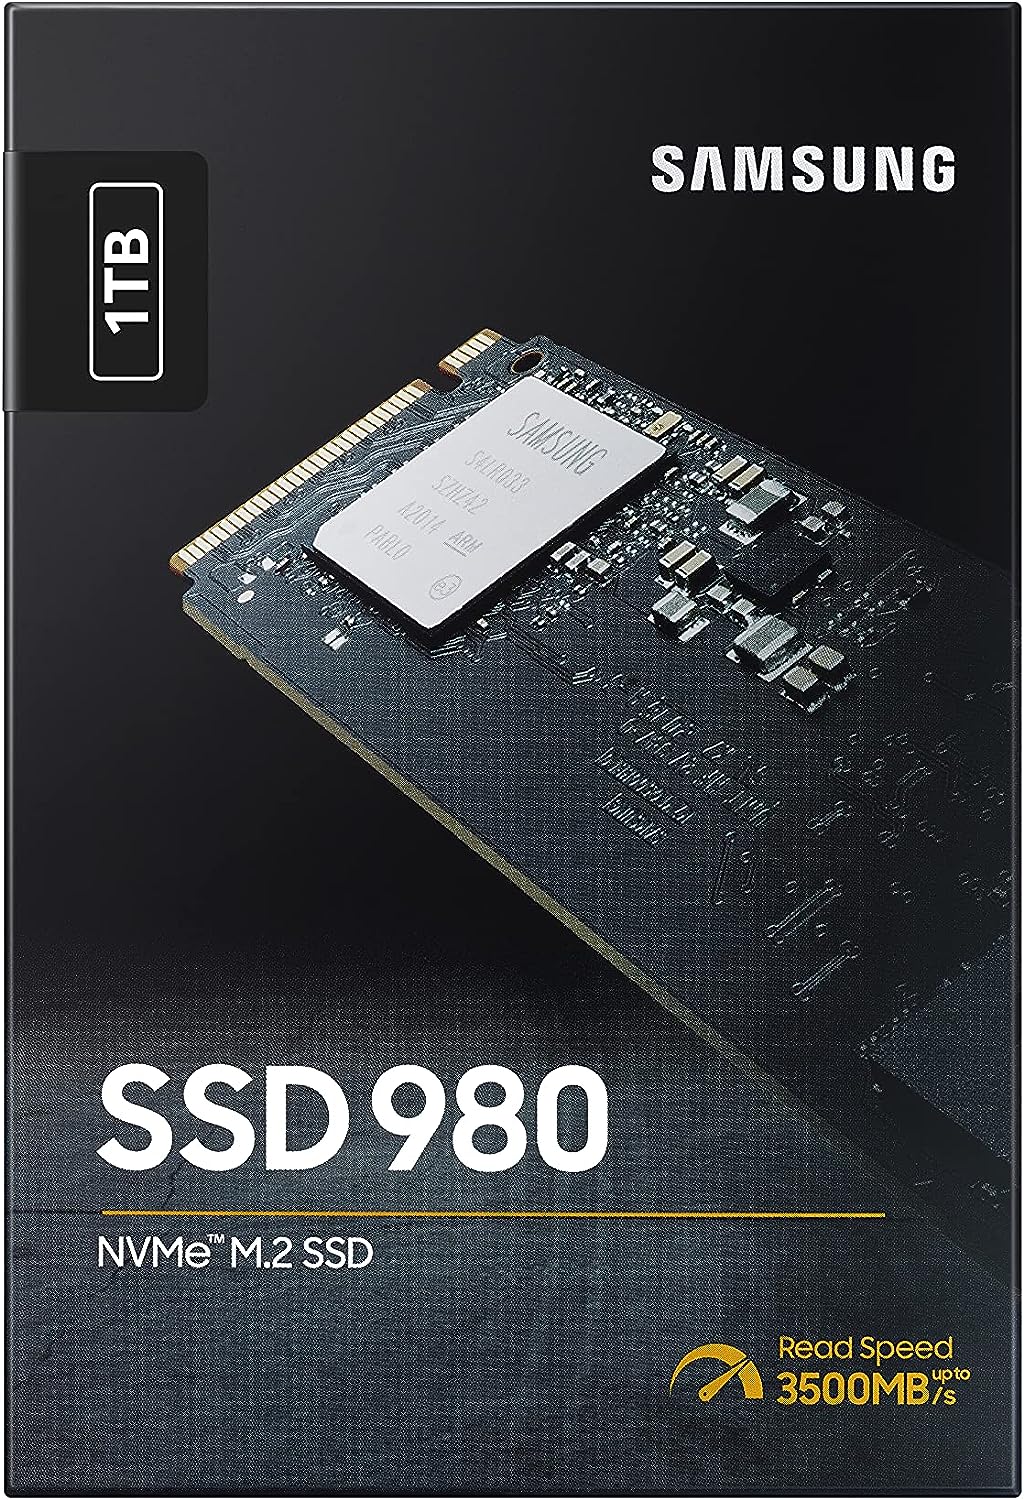 SAMSUNG 1TB NVMe SSD - Plug and play with read/write speeds up to 3500/3000 MB/s, 6.2 times faster than SATA SSDs. 8806090572210